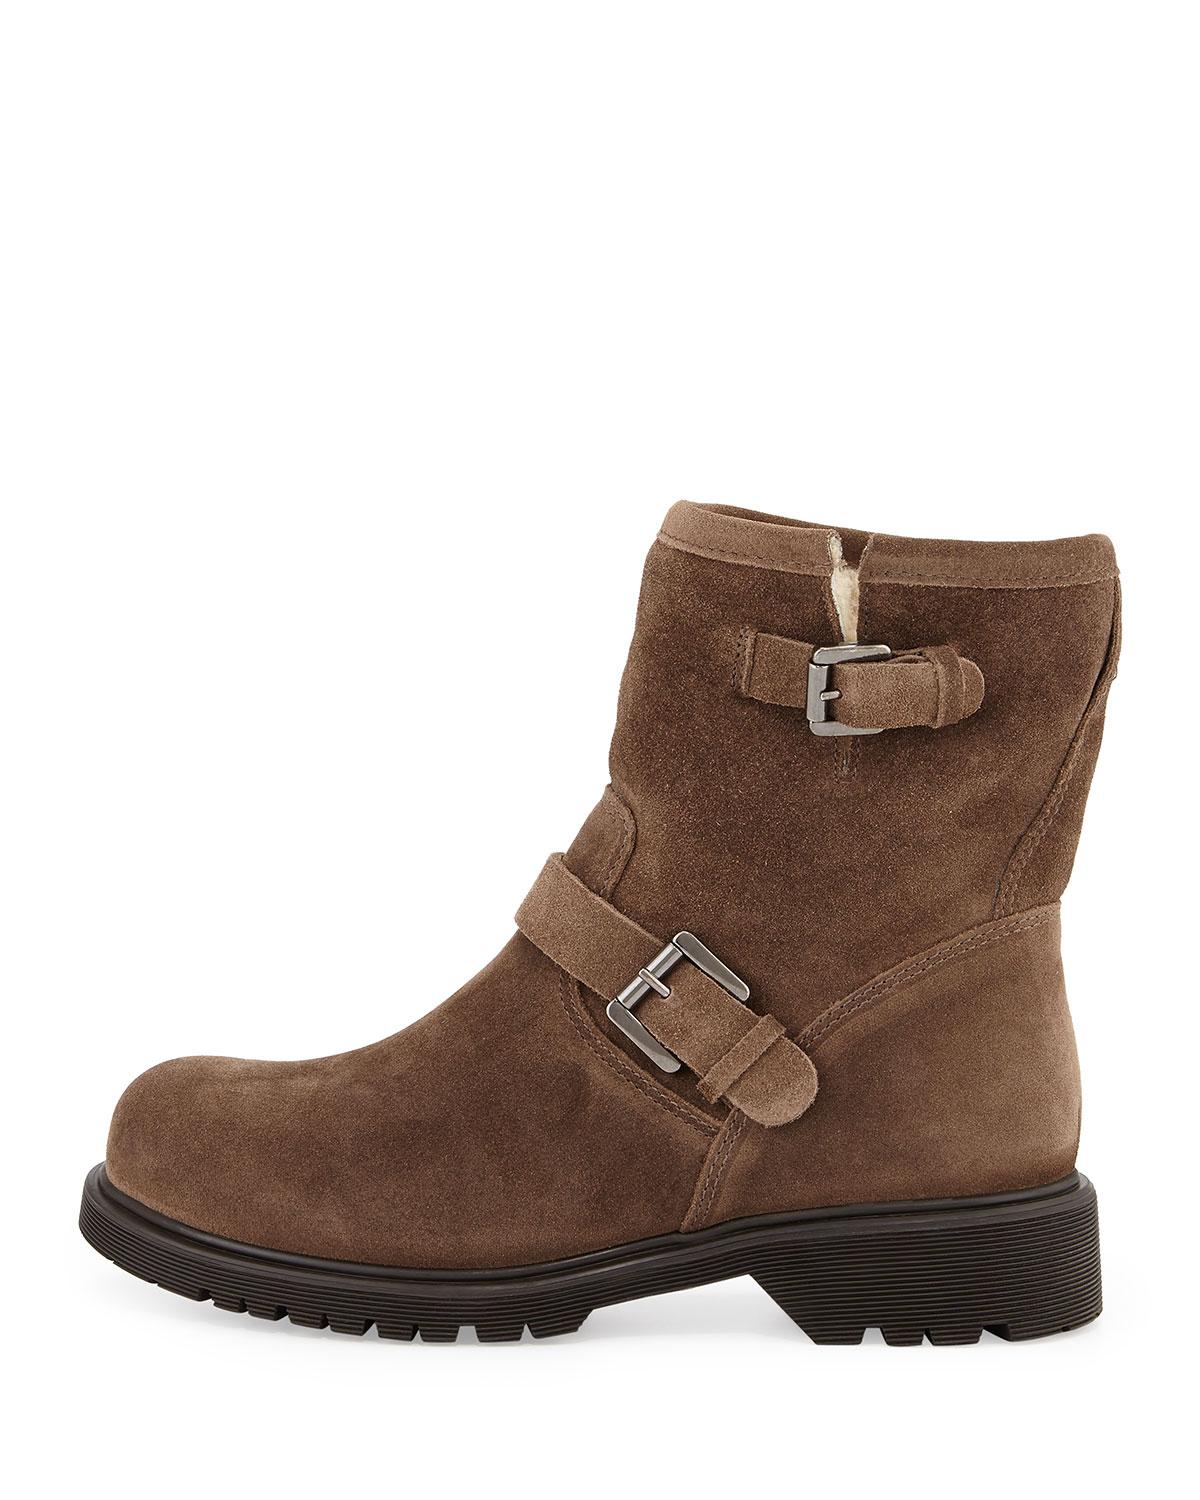 Lyst - La Canadienne Hayes Fur-lined Buckled Mid-calf Boot in Brown